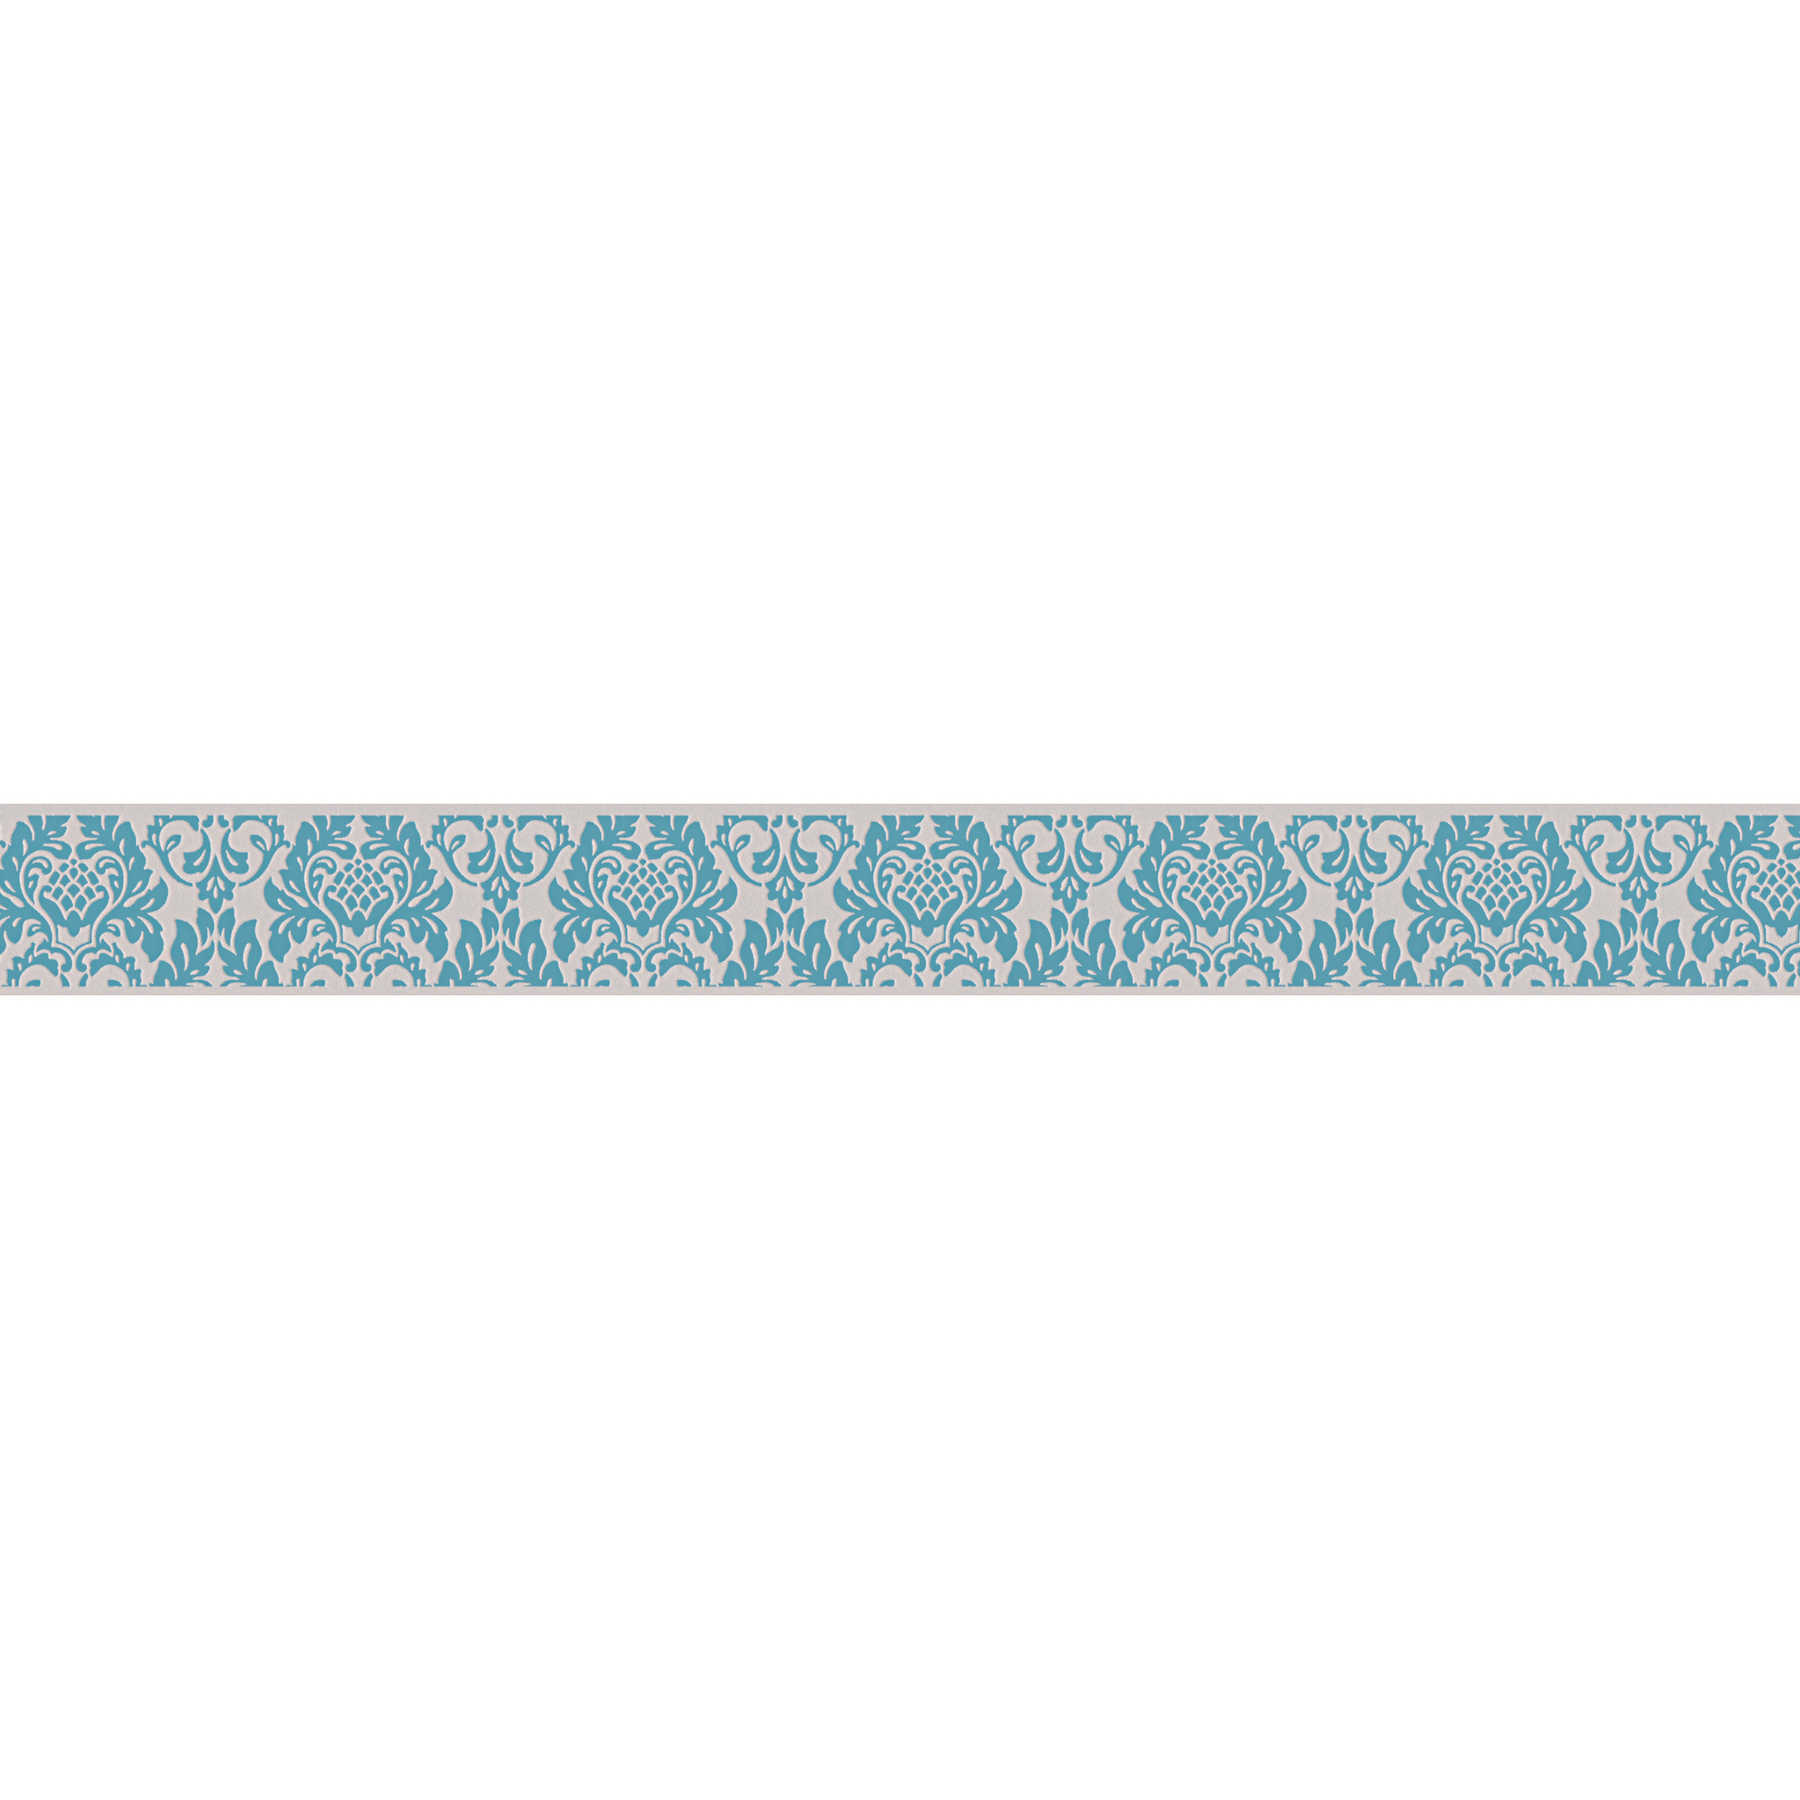         Turquoise ornament border in young design - blue, green, beige
    